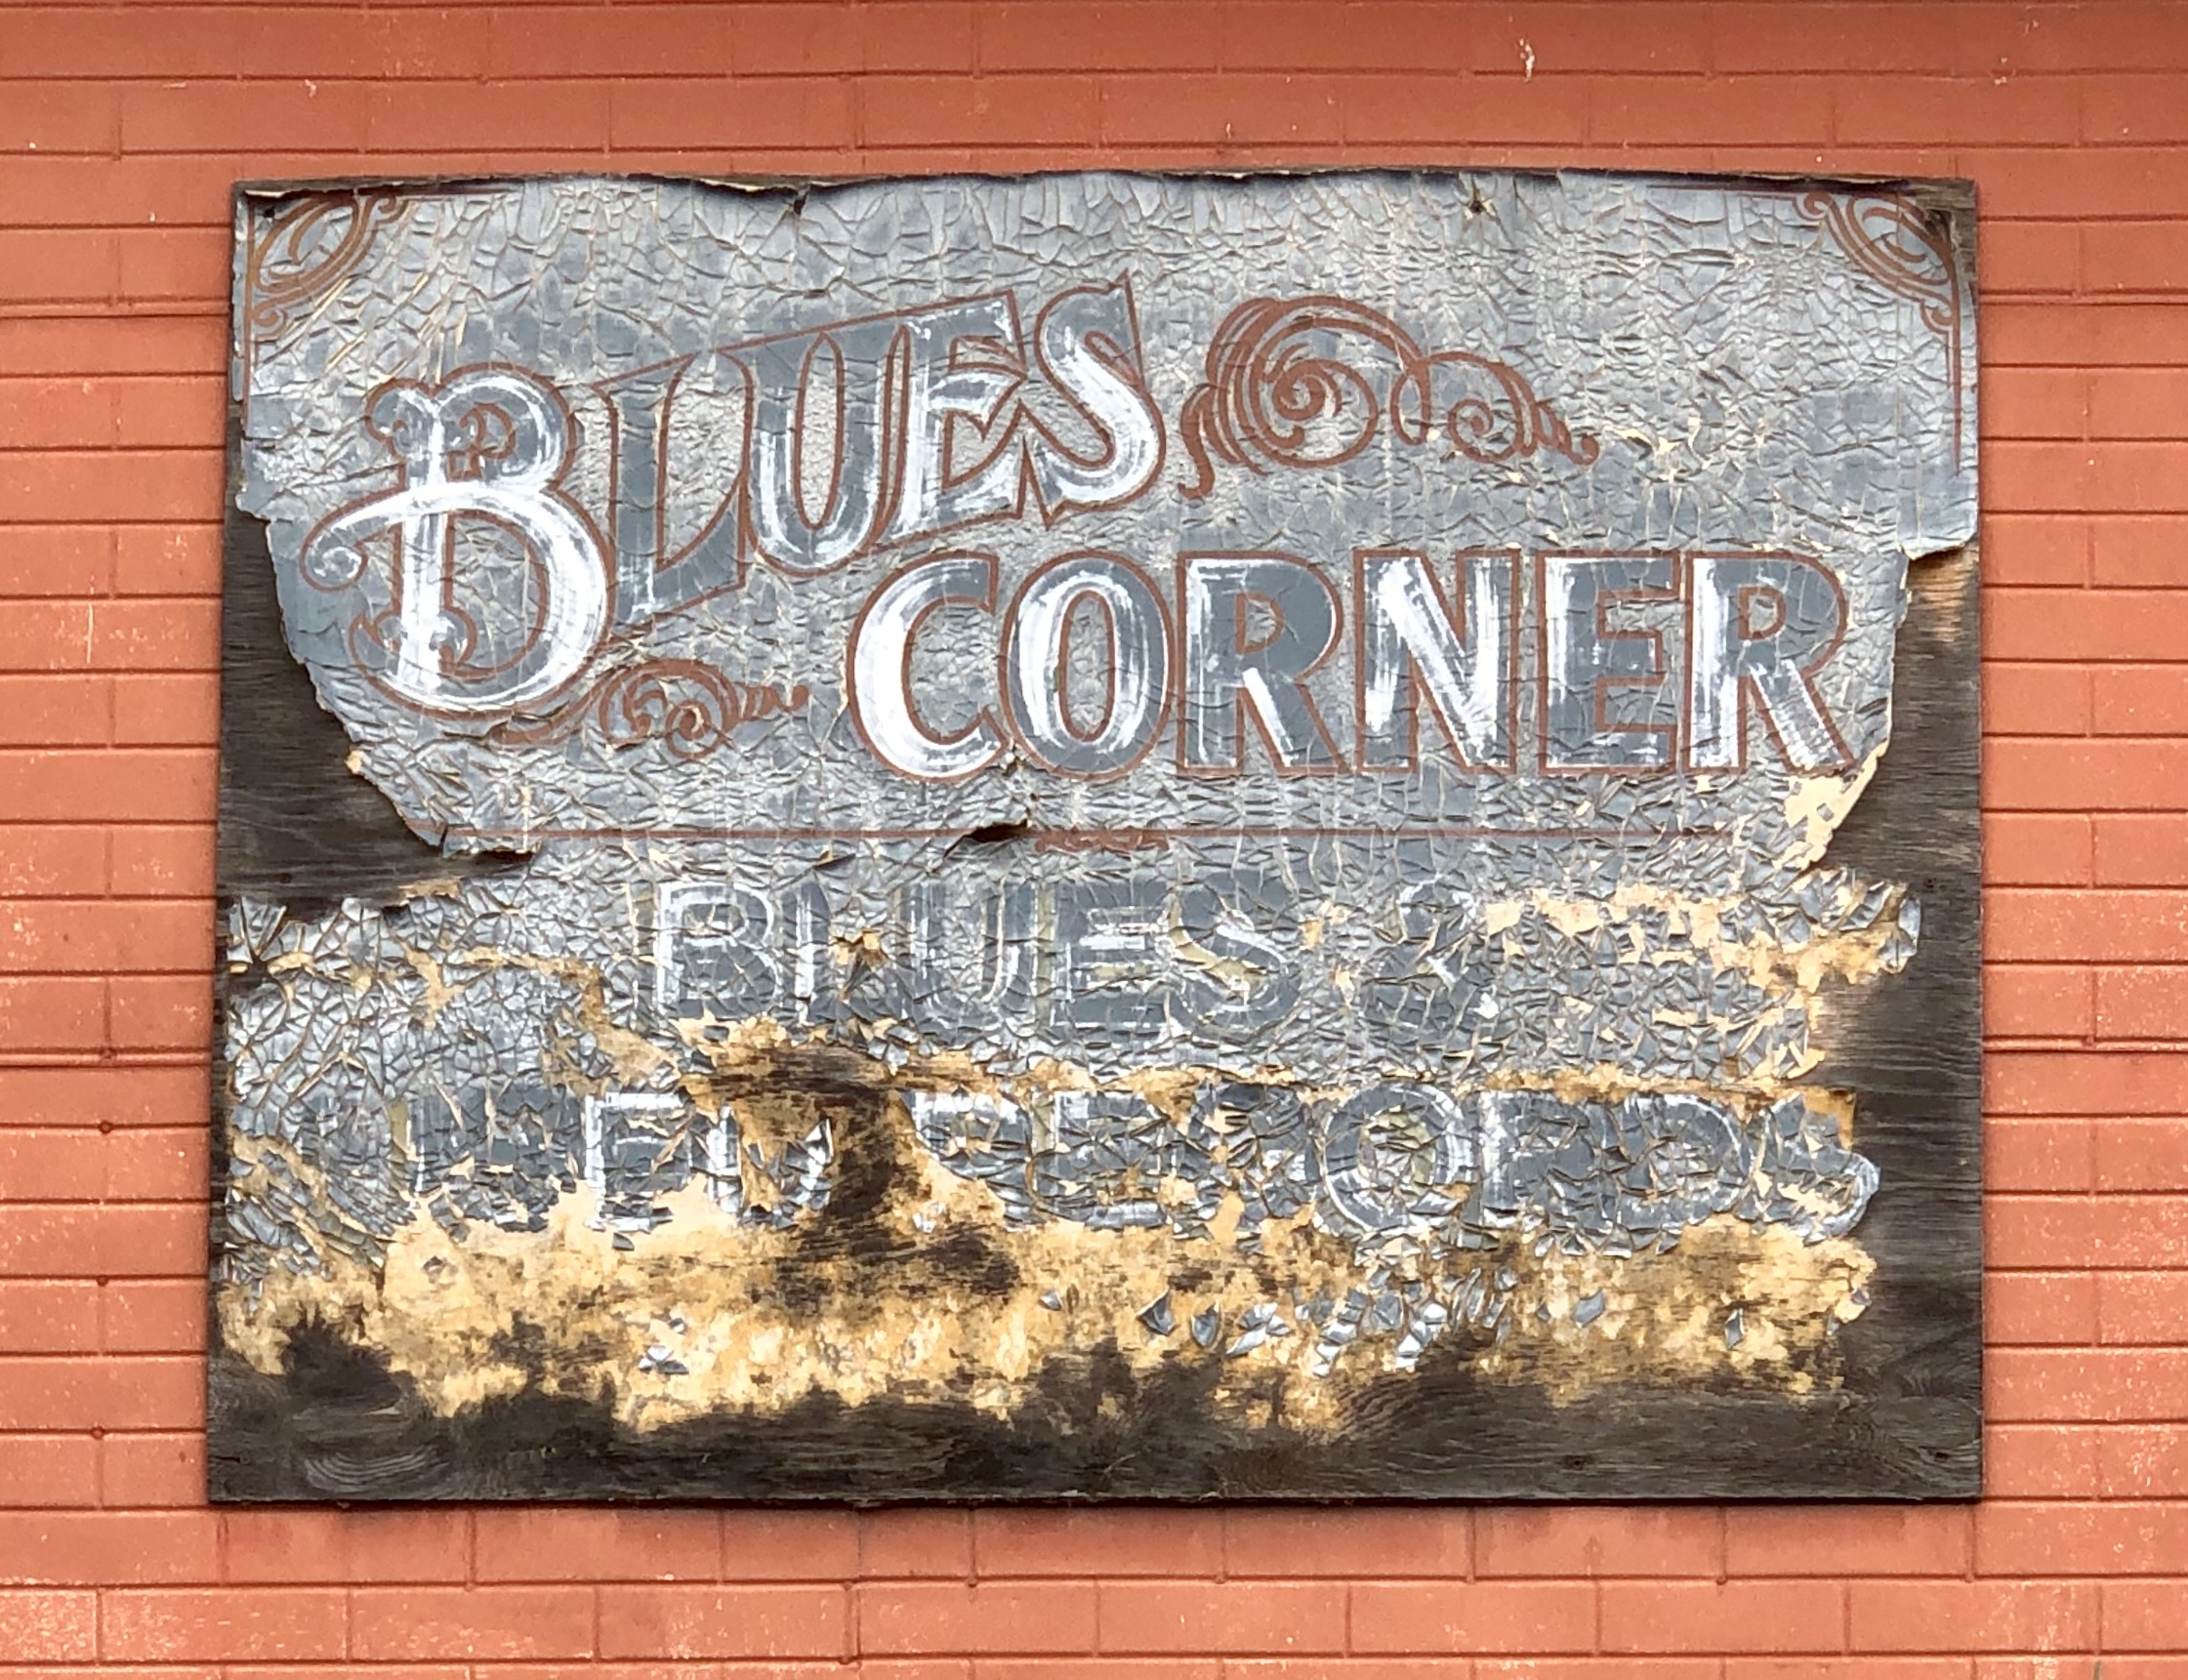 The Blues Never Die